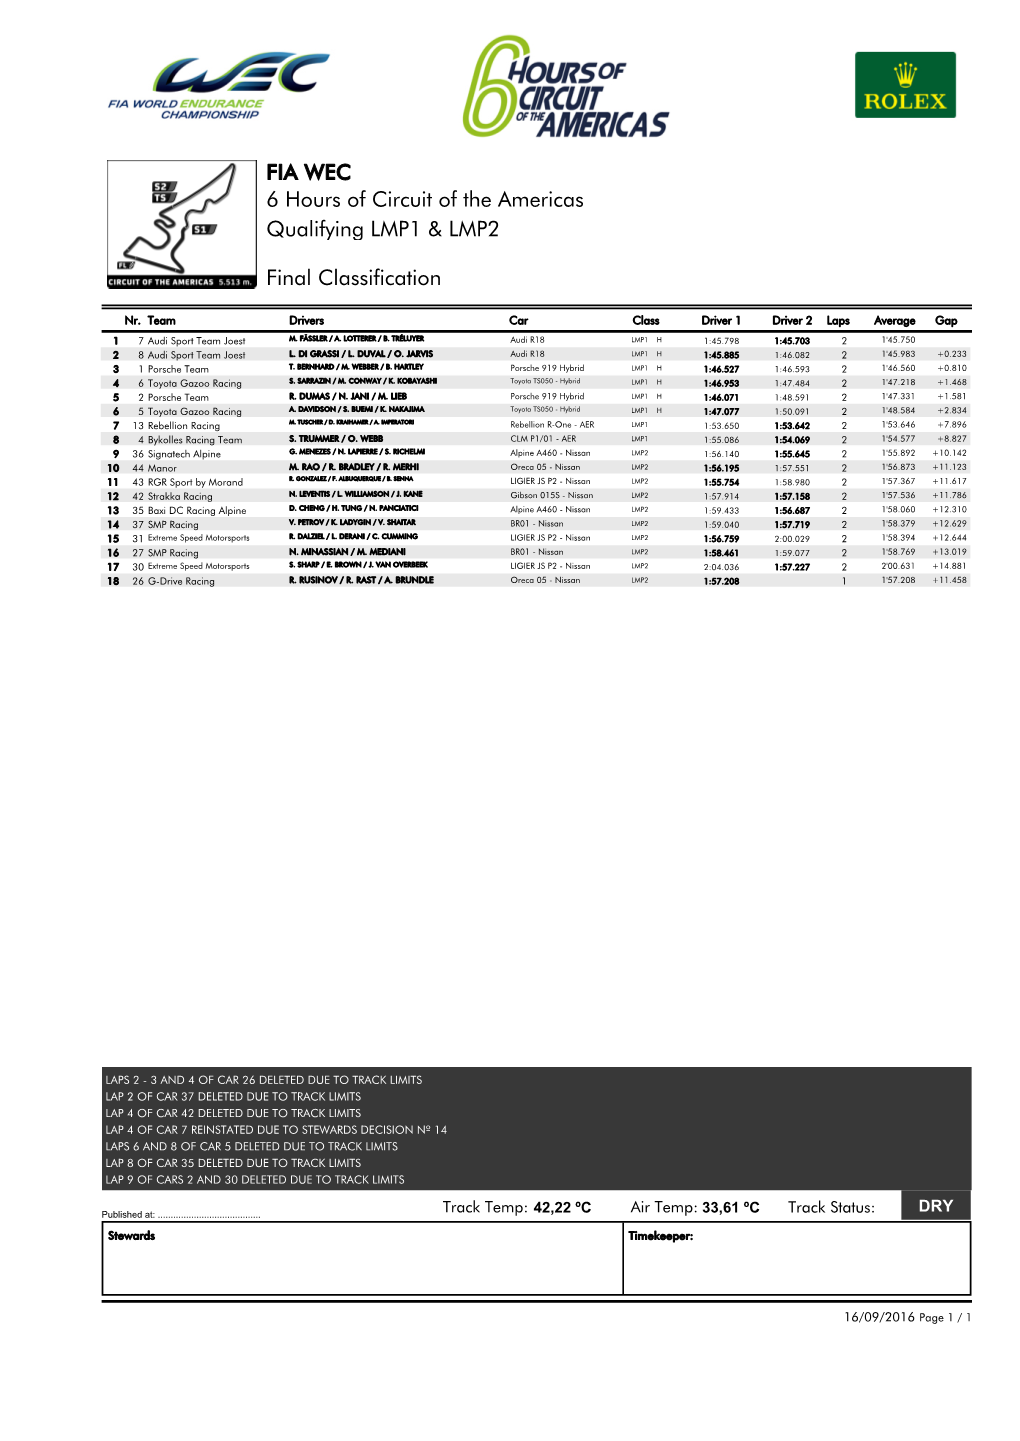 Qualifying LMP1 & LMP2 6 Hours of Circuit of the Americas FIA WEC